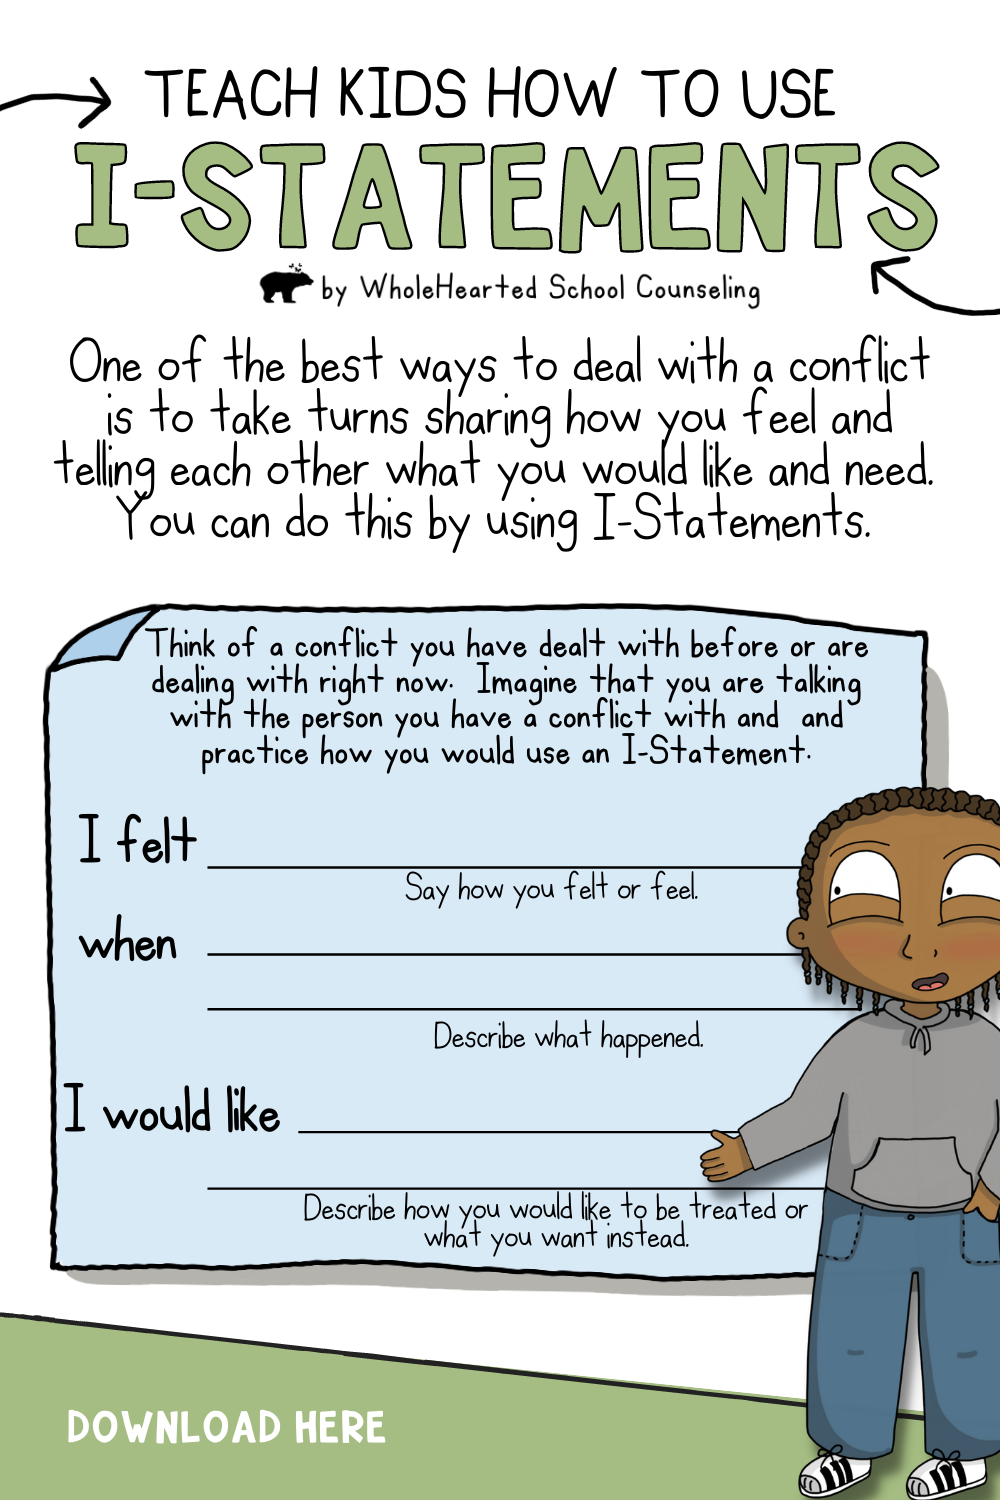 Worksheet that teaches kids how to use I-Statements to deal with conflict.